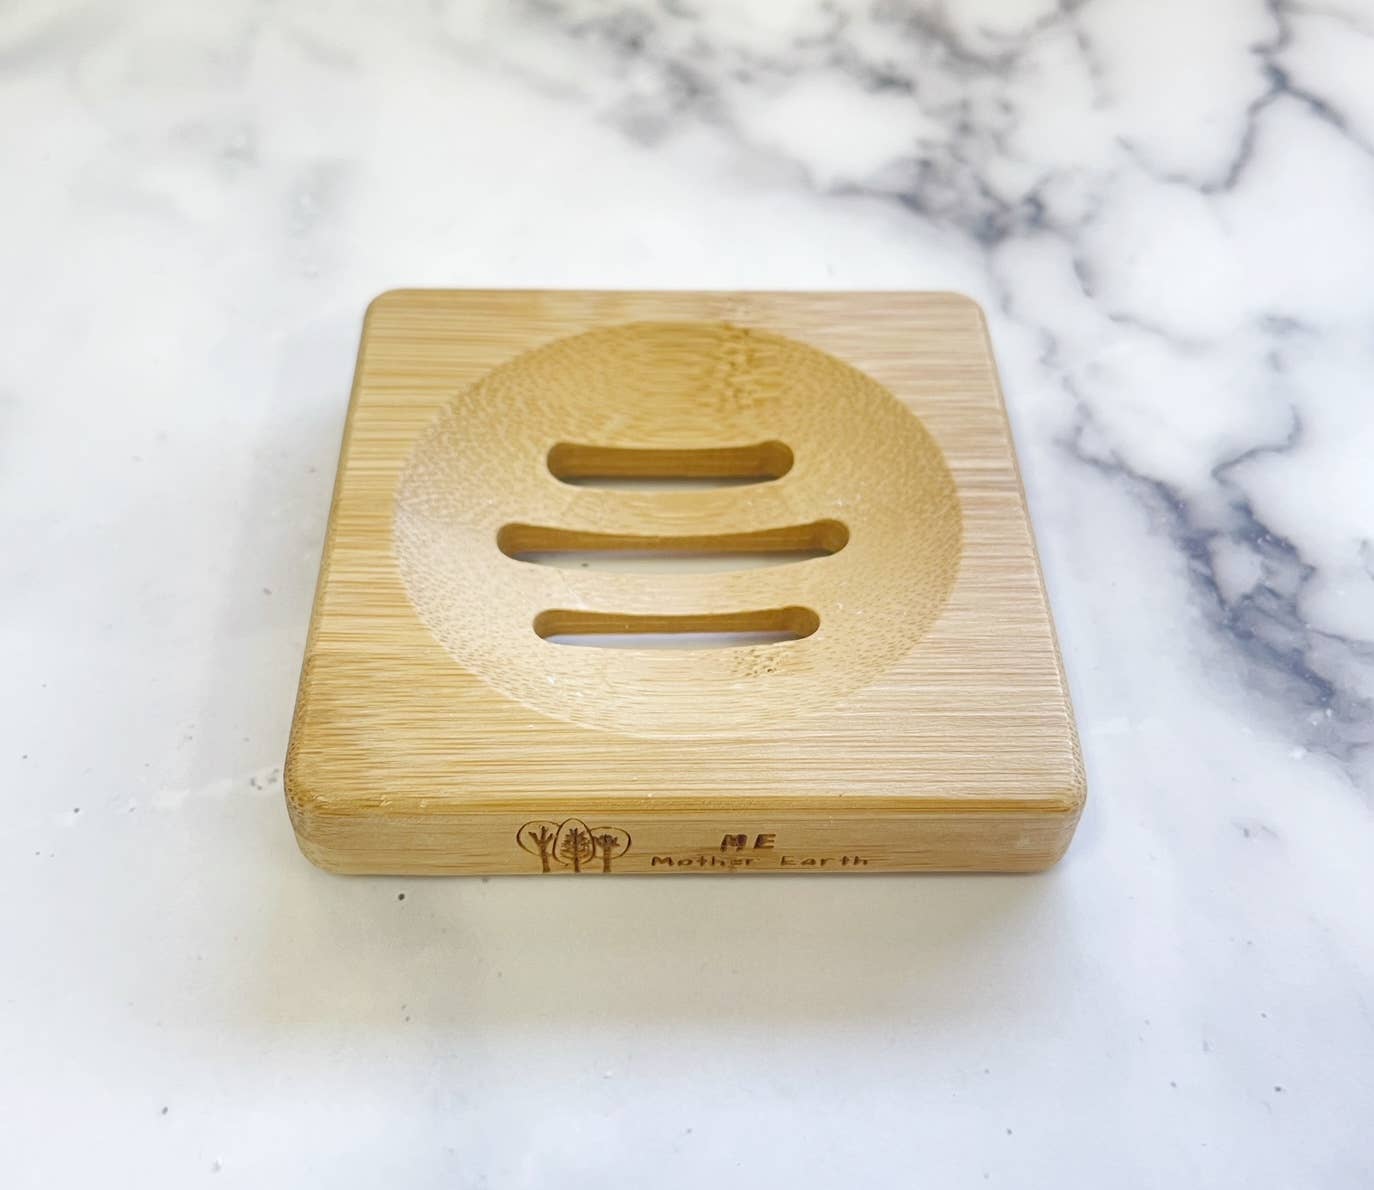 Me Mother Earth - Square Bamboo Soap Dish